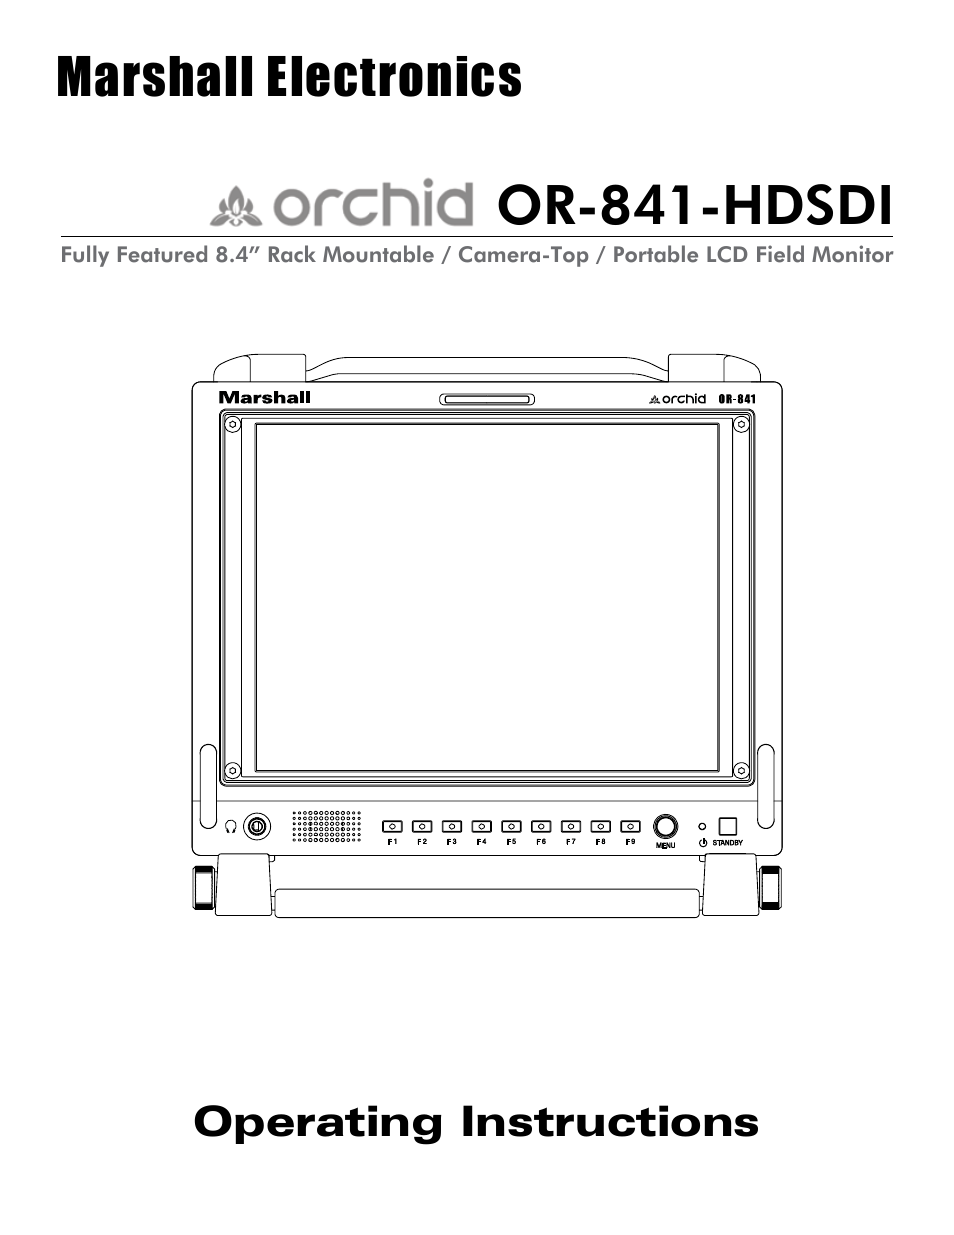 ORCHID OR-841-HDSDI